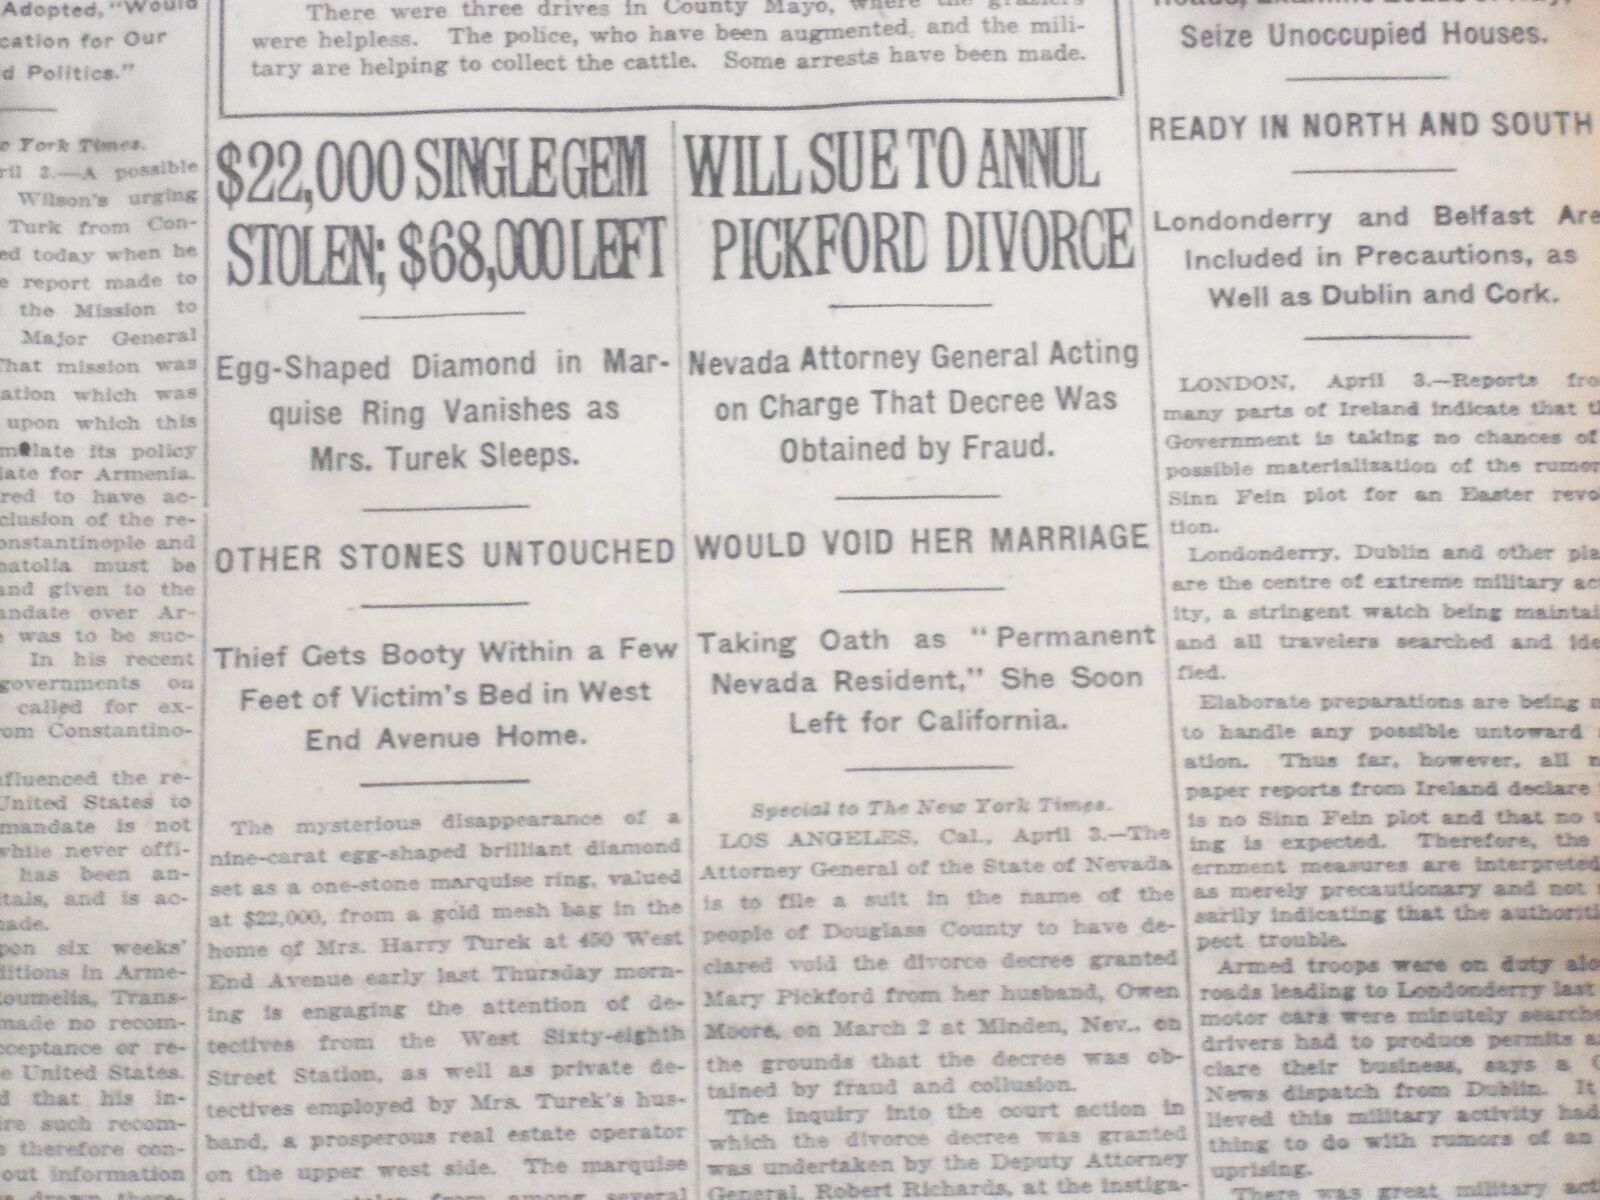 1920 APRIL 4 NEW YORK TIMES - SUE TO ANNUL PICKFORD DIVORSE - NT 8280